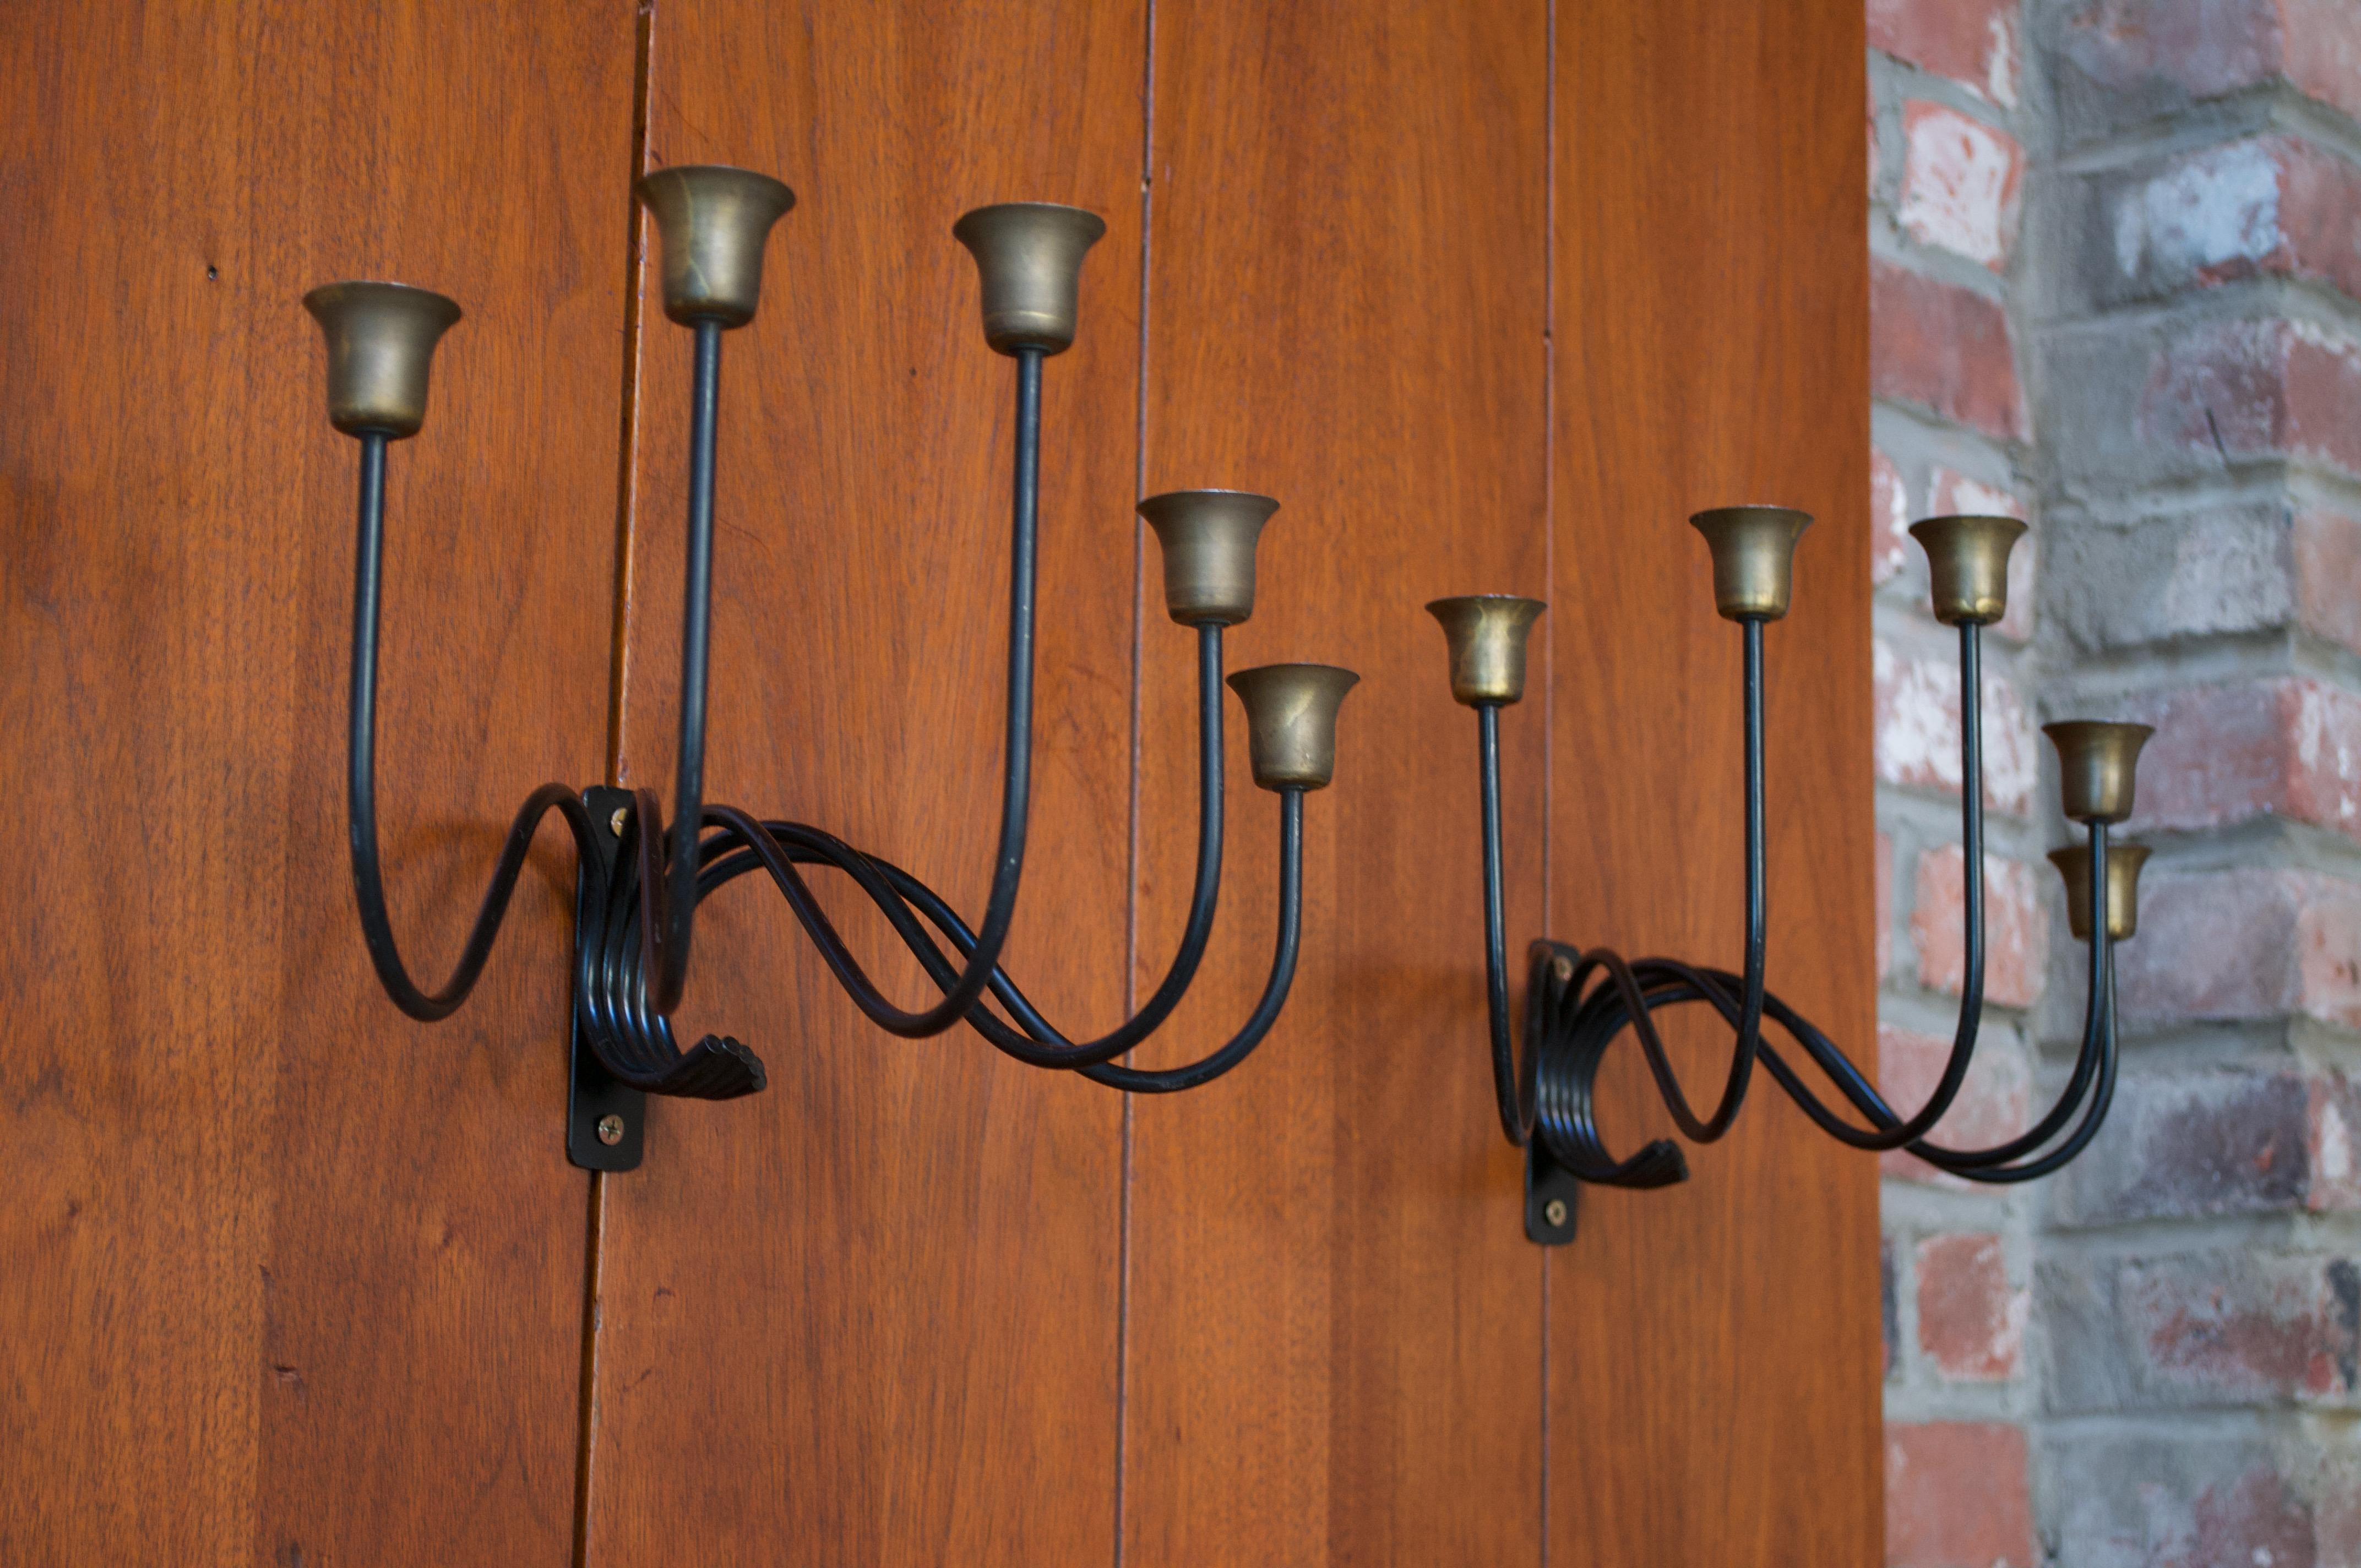 Mid-20th Century Pair of Brass and Metal Danish Candle Sconces by Svend Aage Holm Sørensen